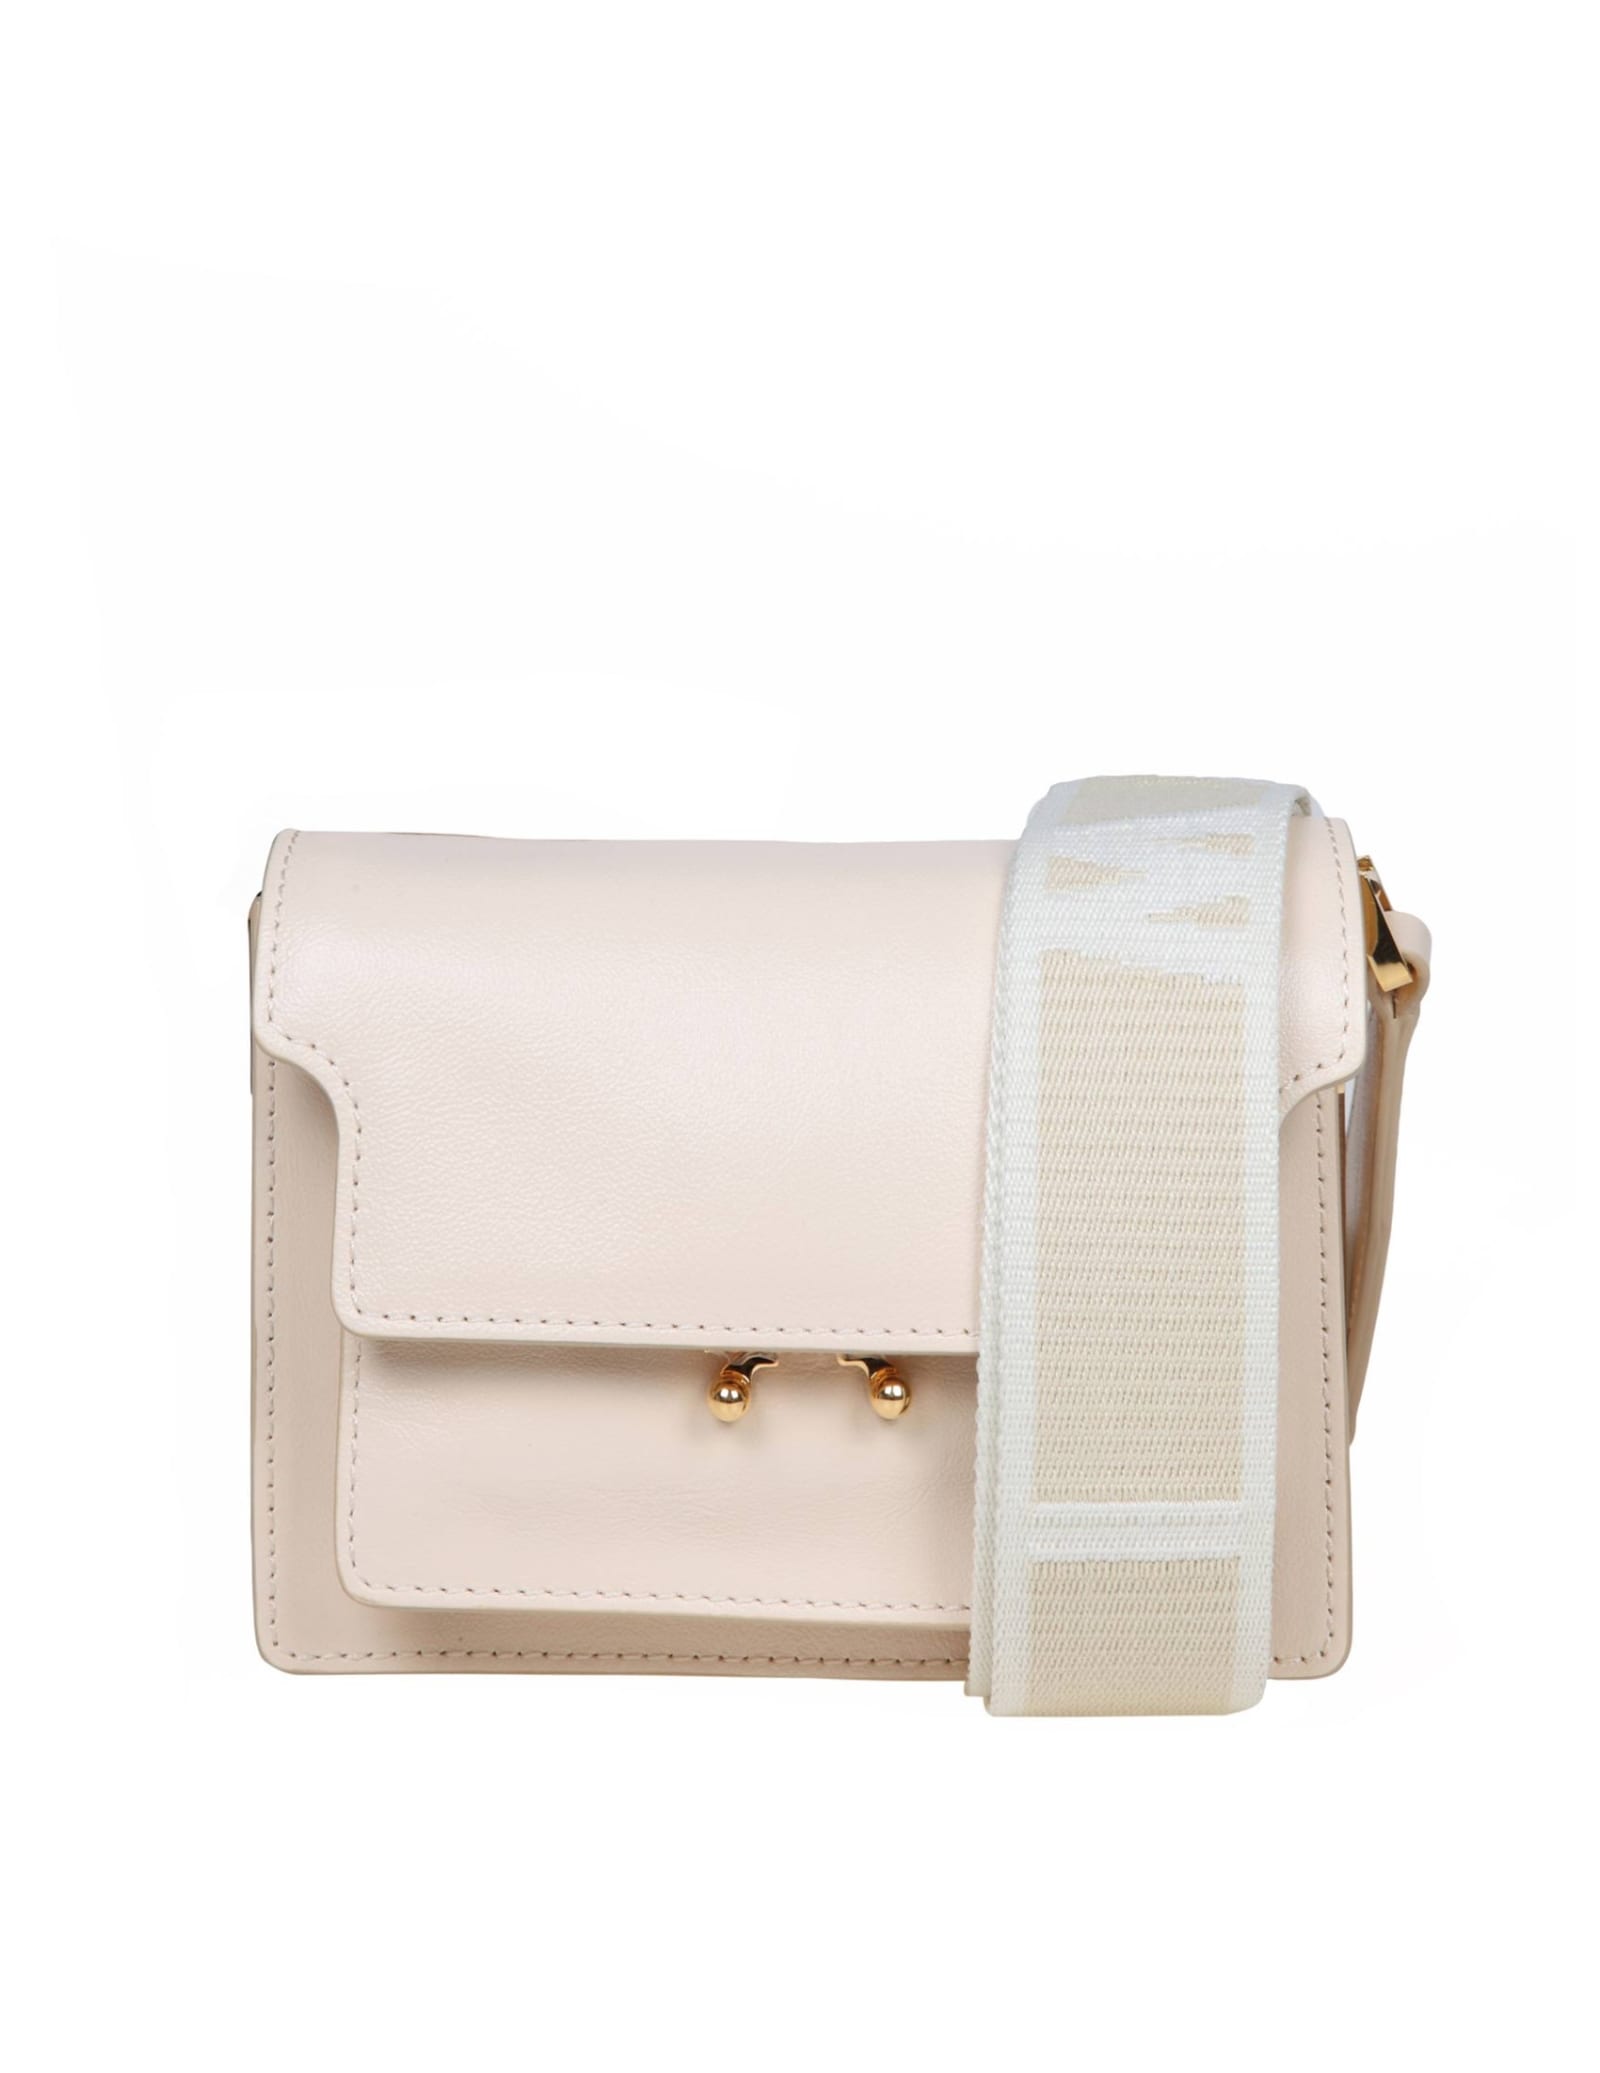 Marni Small Trunk Soft Shoulder Bag In Cream Color Leather